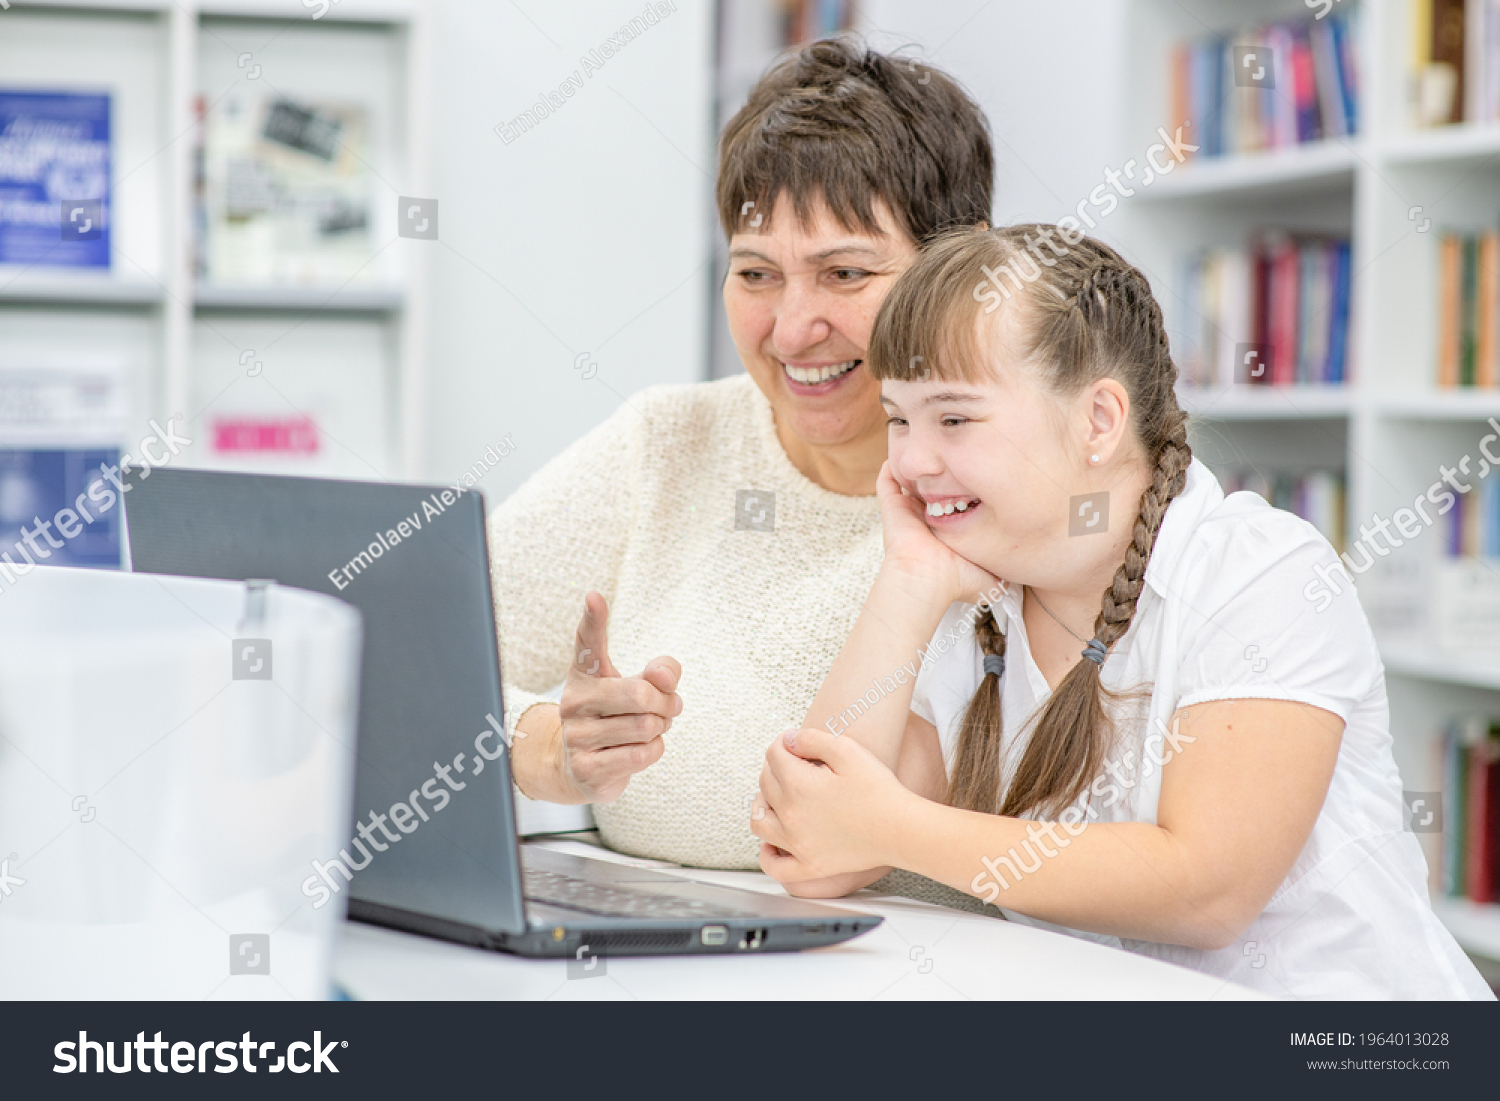 Happy teacher and smiling girl with down syndrome use a laptop at library. Education for disabled children concept #1964013028